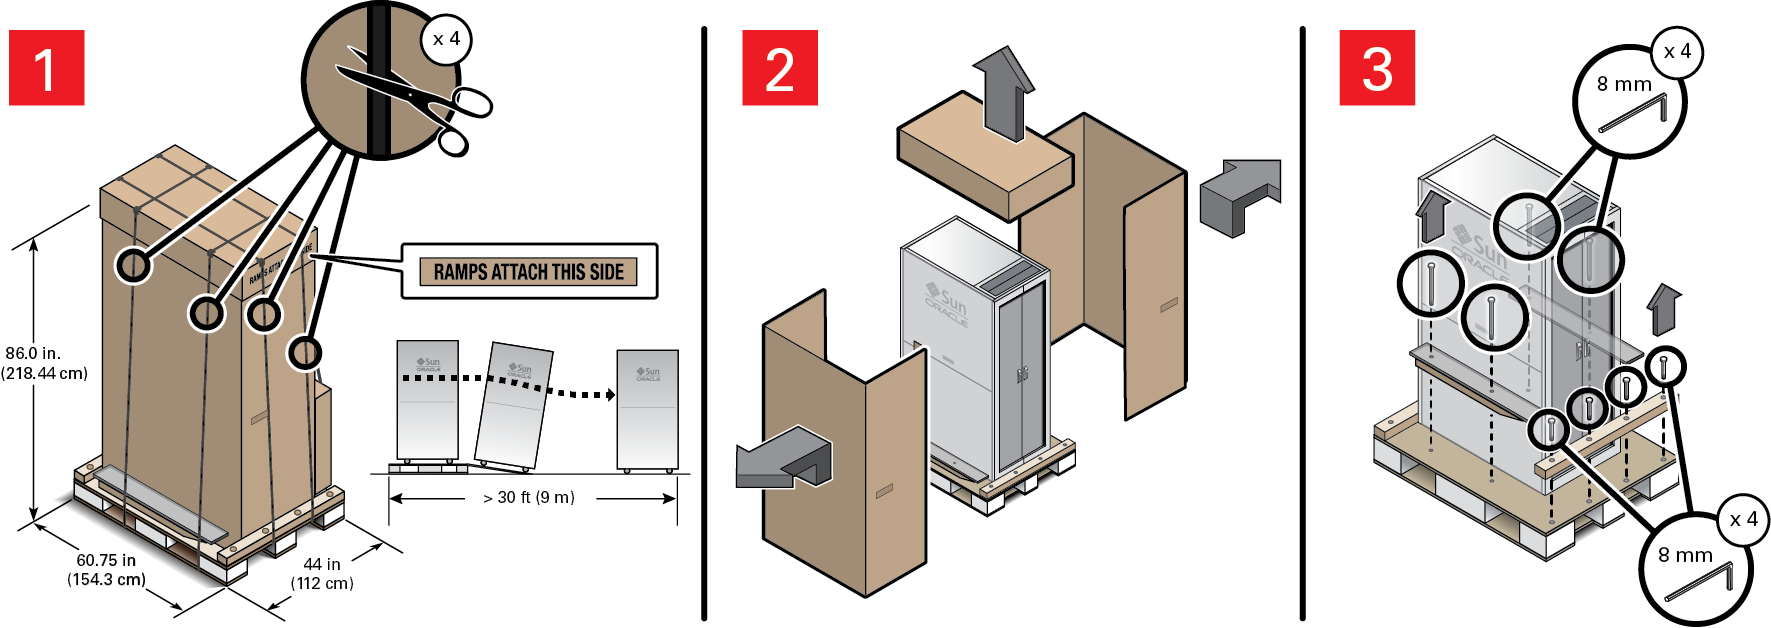 image:Graphic that shows the first three steps                                                   to unpack the rack